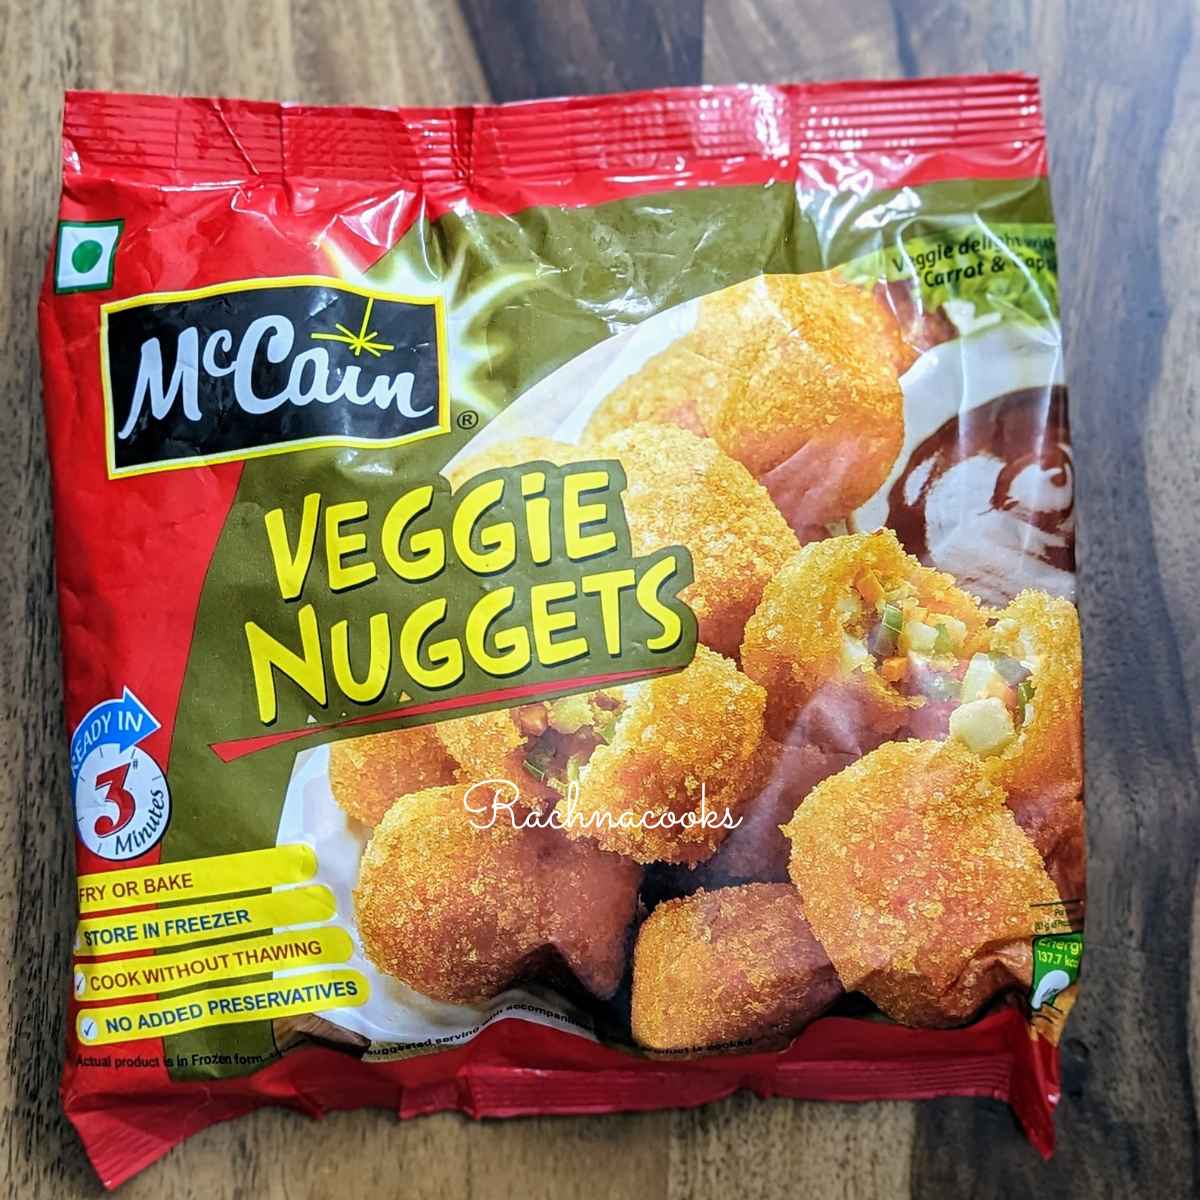 A pack of veggie nuggets or tots